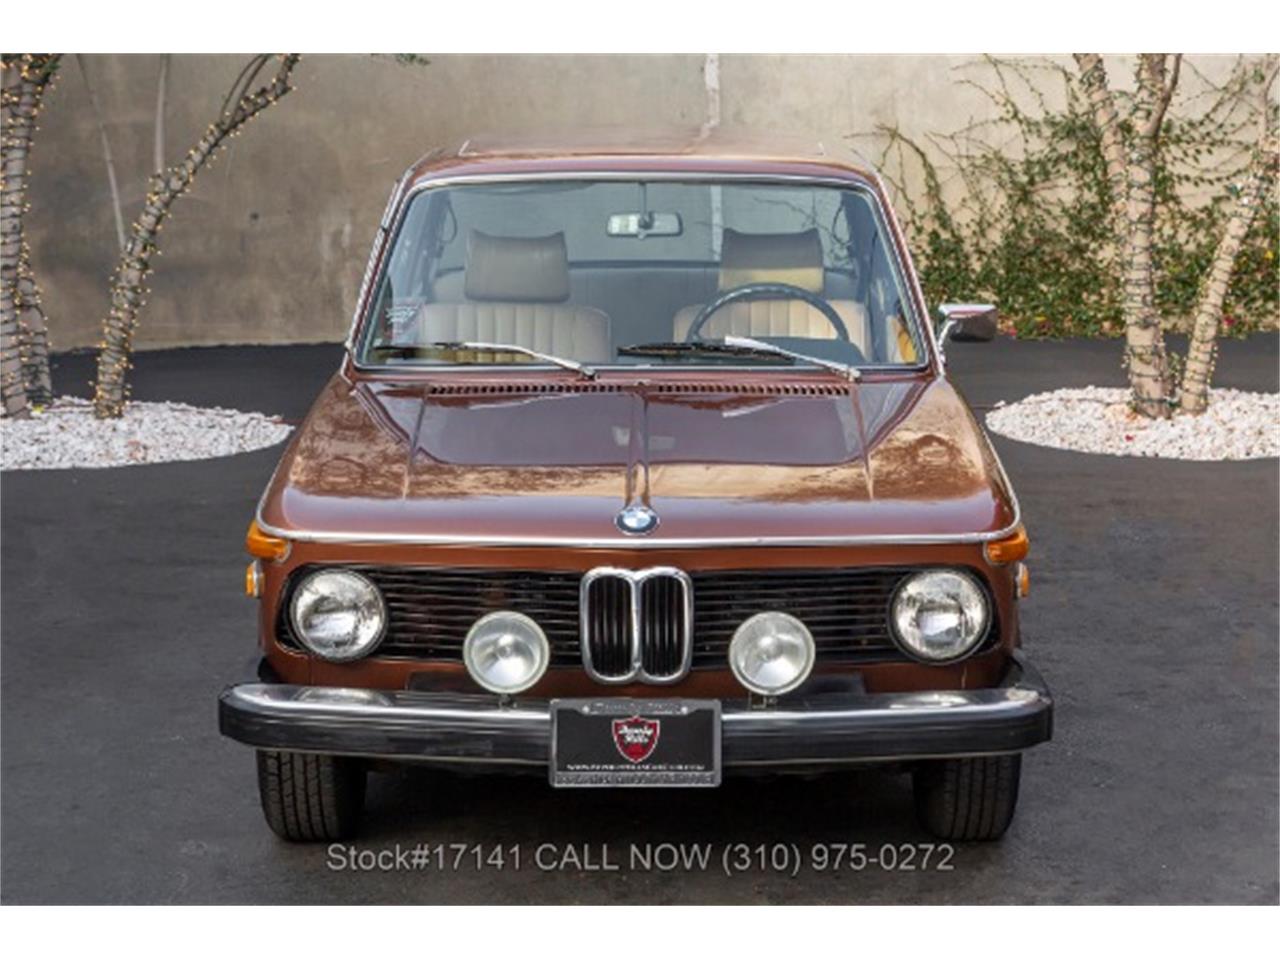 For Sale: 1976 BMW 2002 in Beverly Hills, California for sale in Beverly Hills, CA